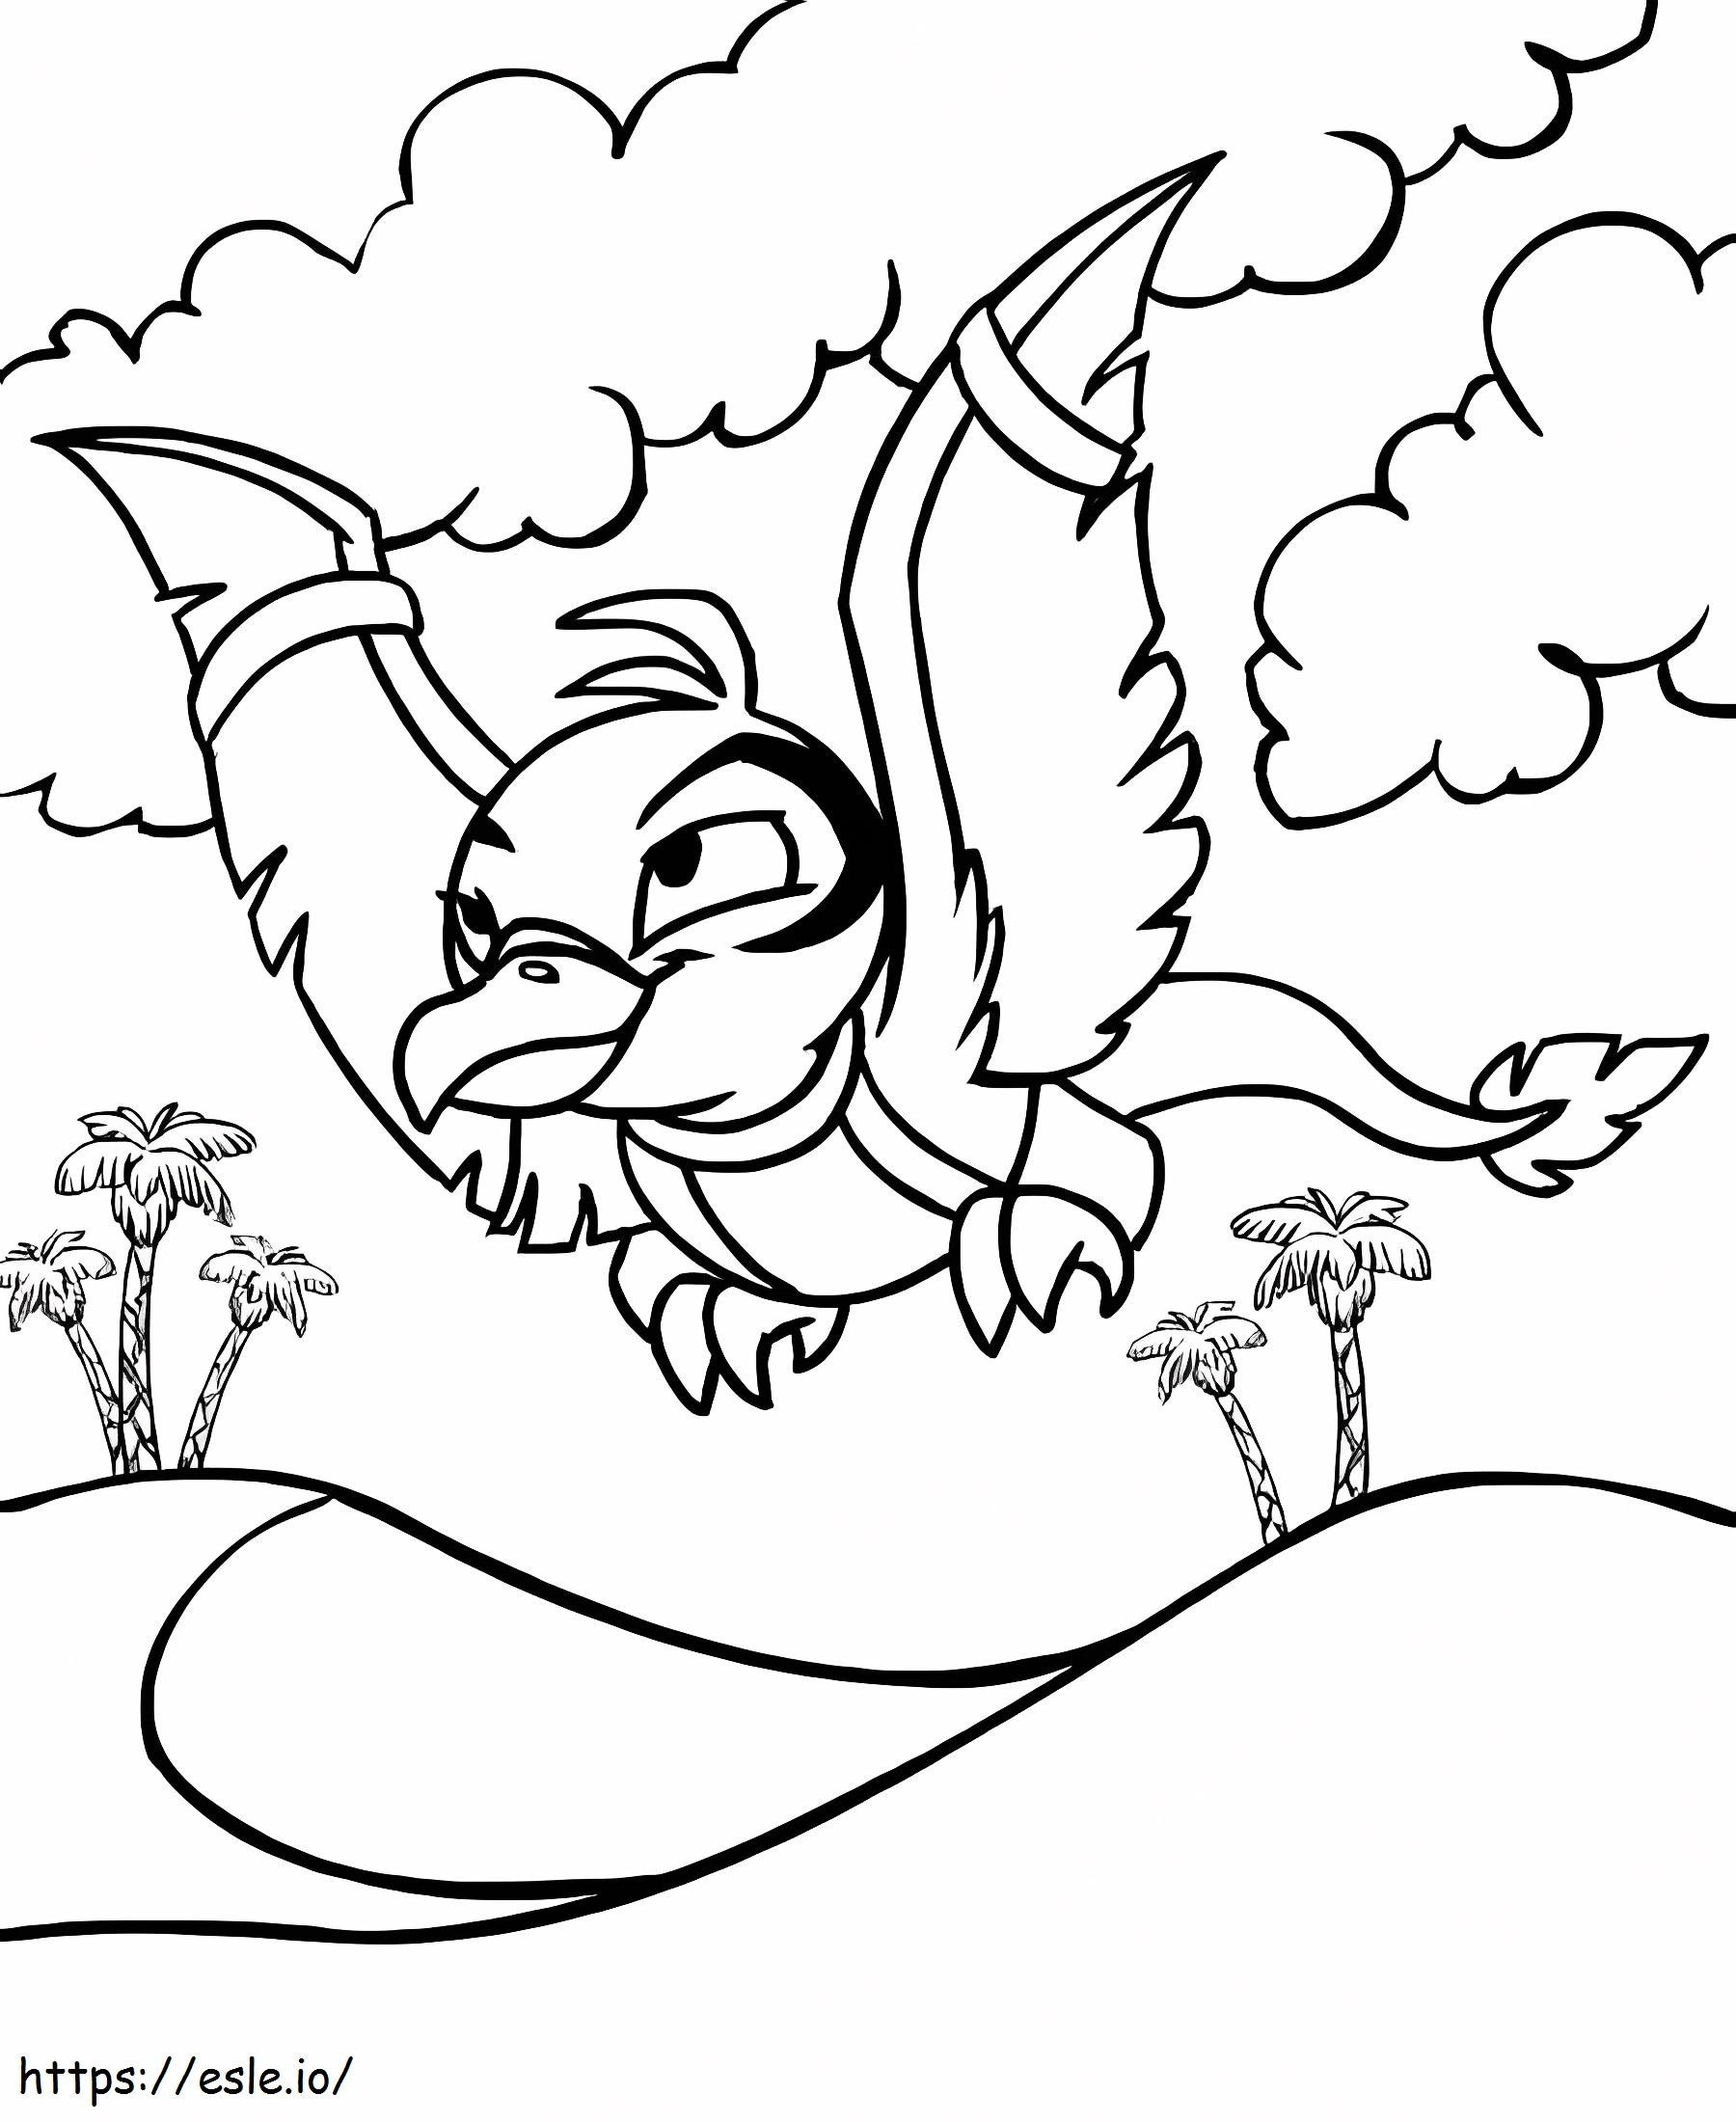 Neopets 29 coloring page